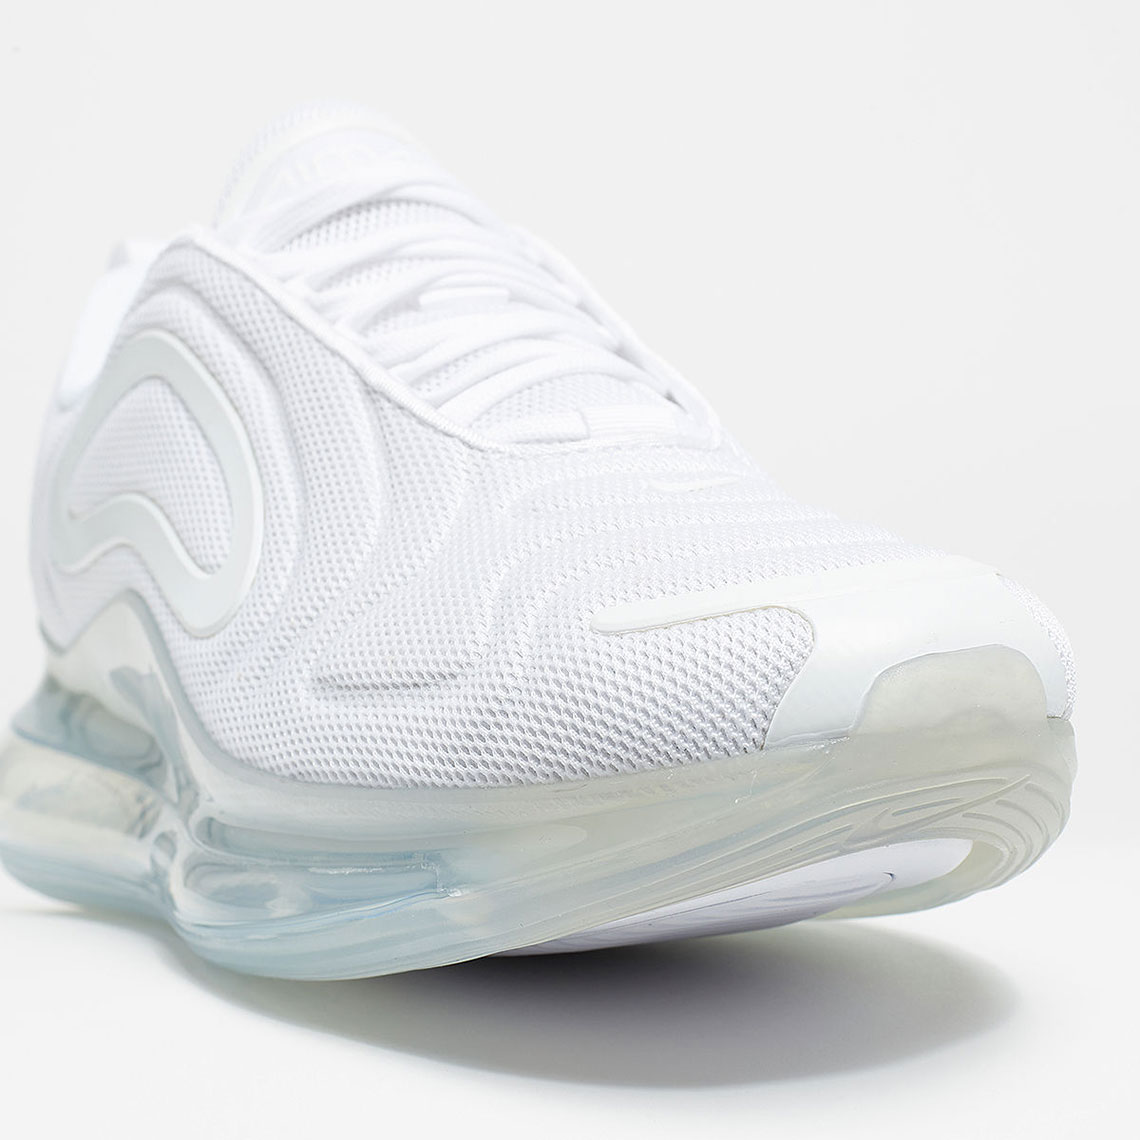 Nike Air Max 720 Pure Platinum 2019 W for sale